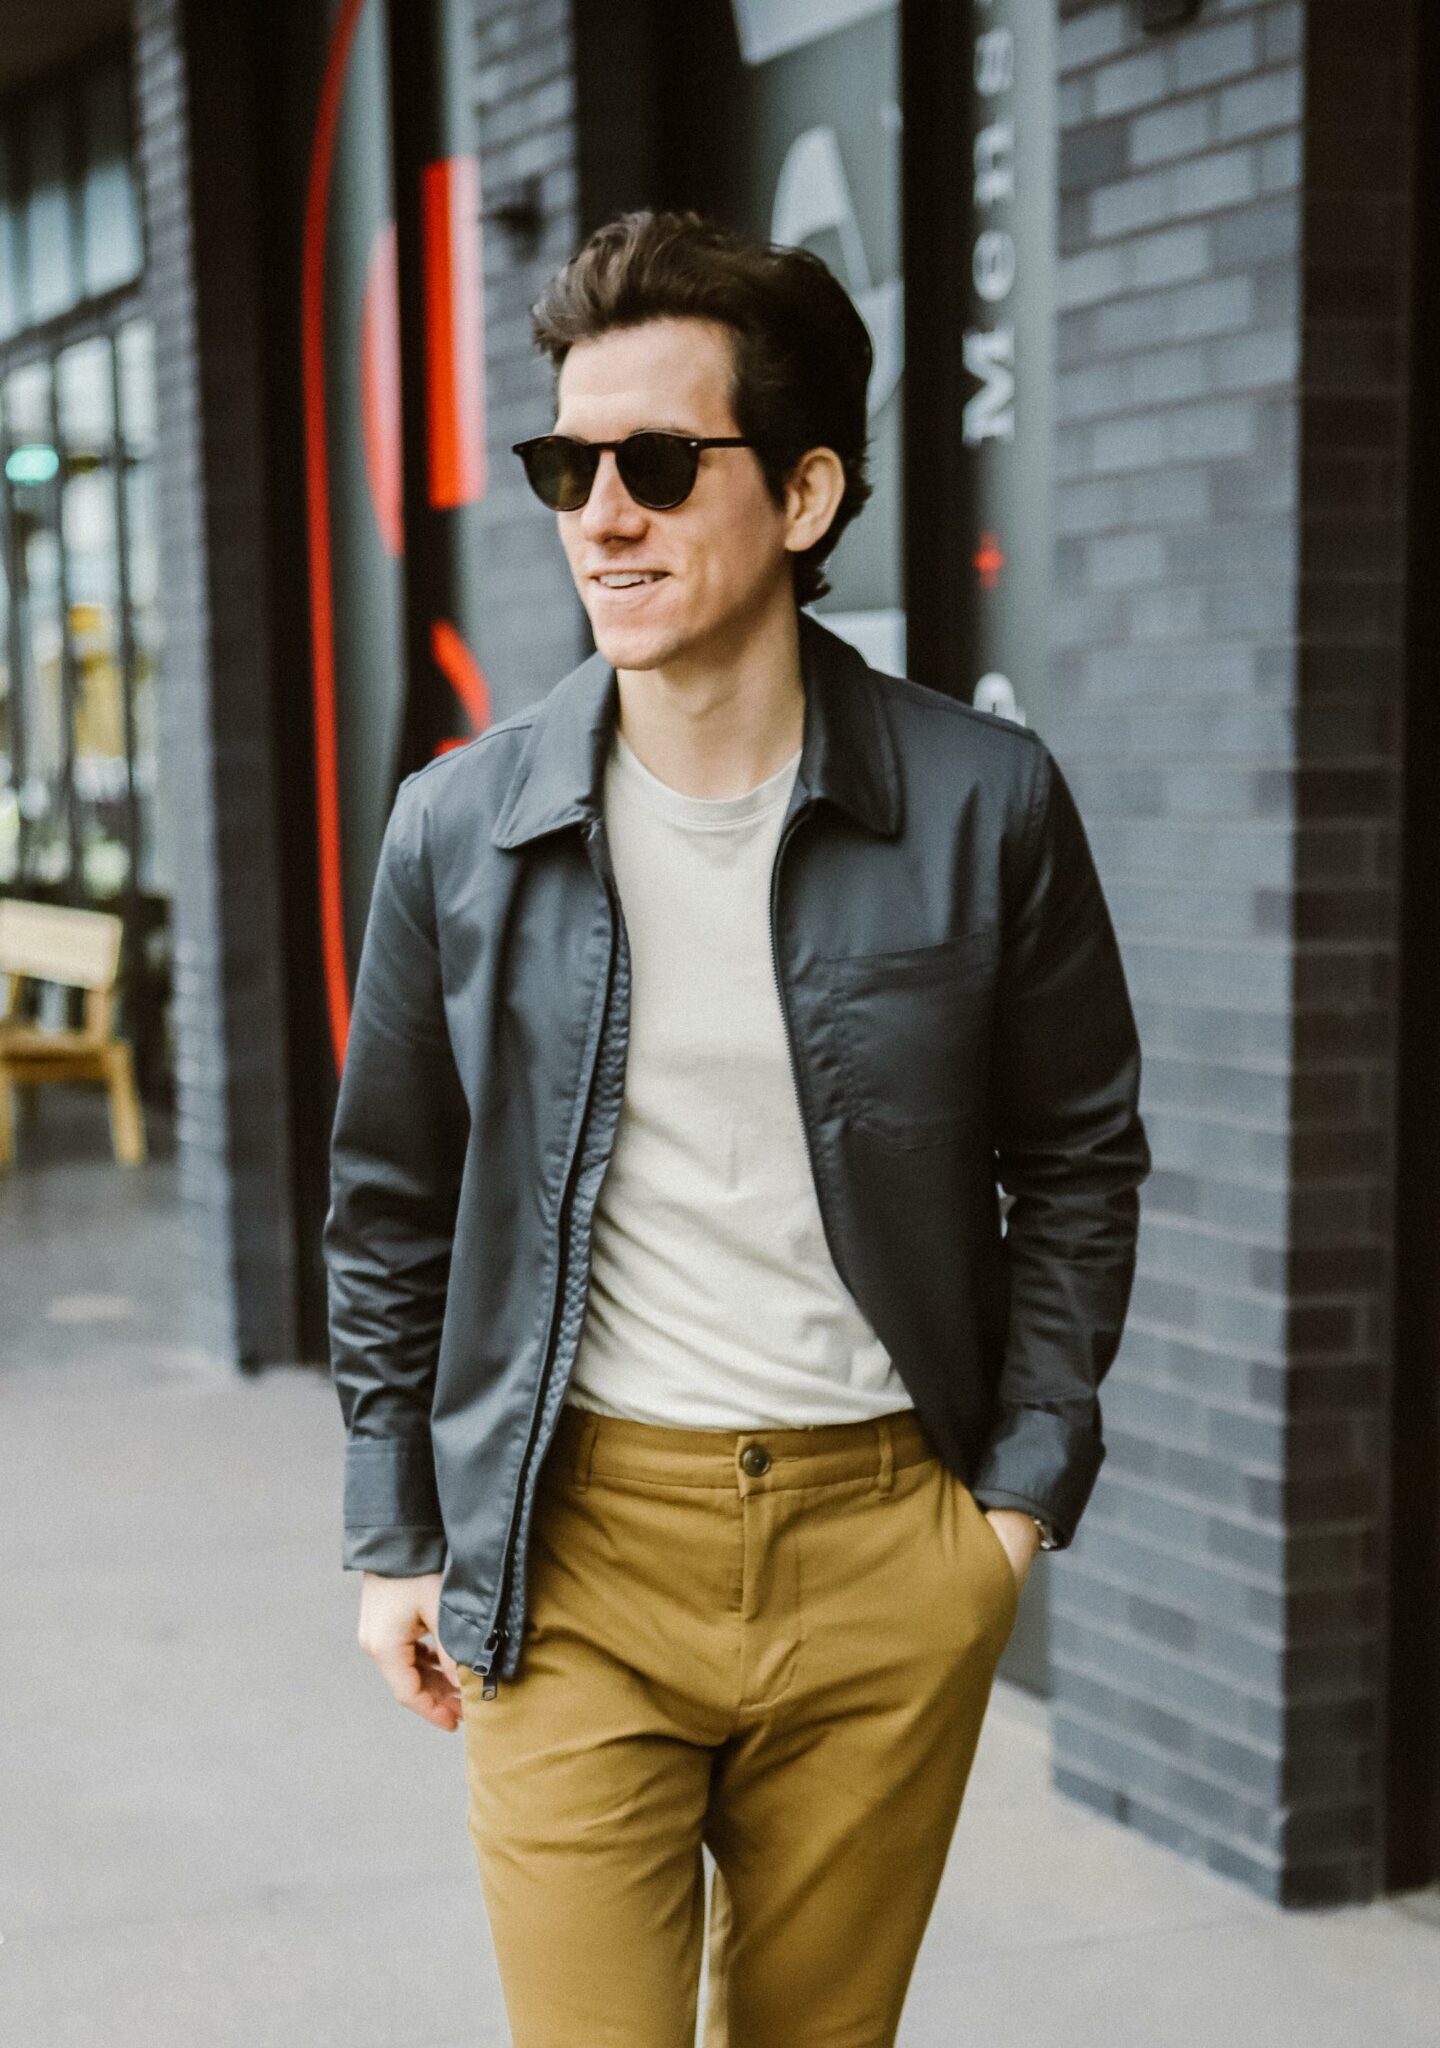 Grey Jacket, Tan Chinos & Sneakers - The Modest Man